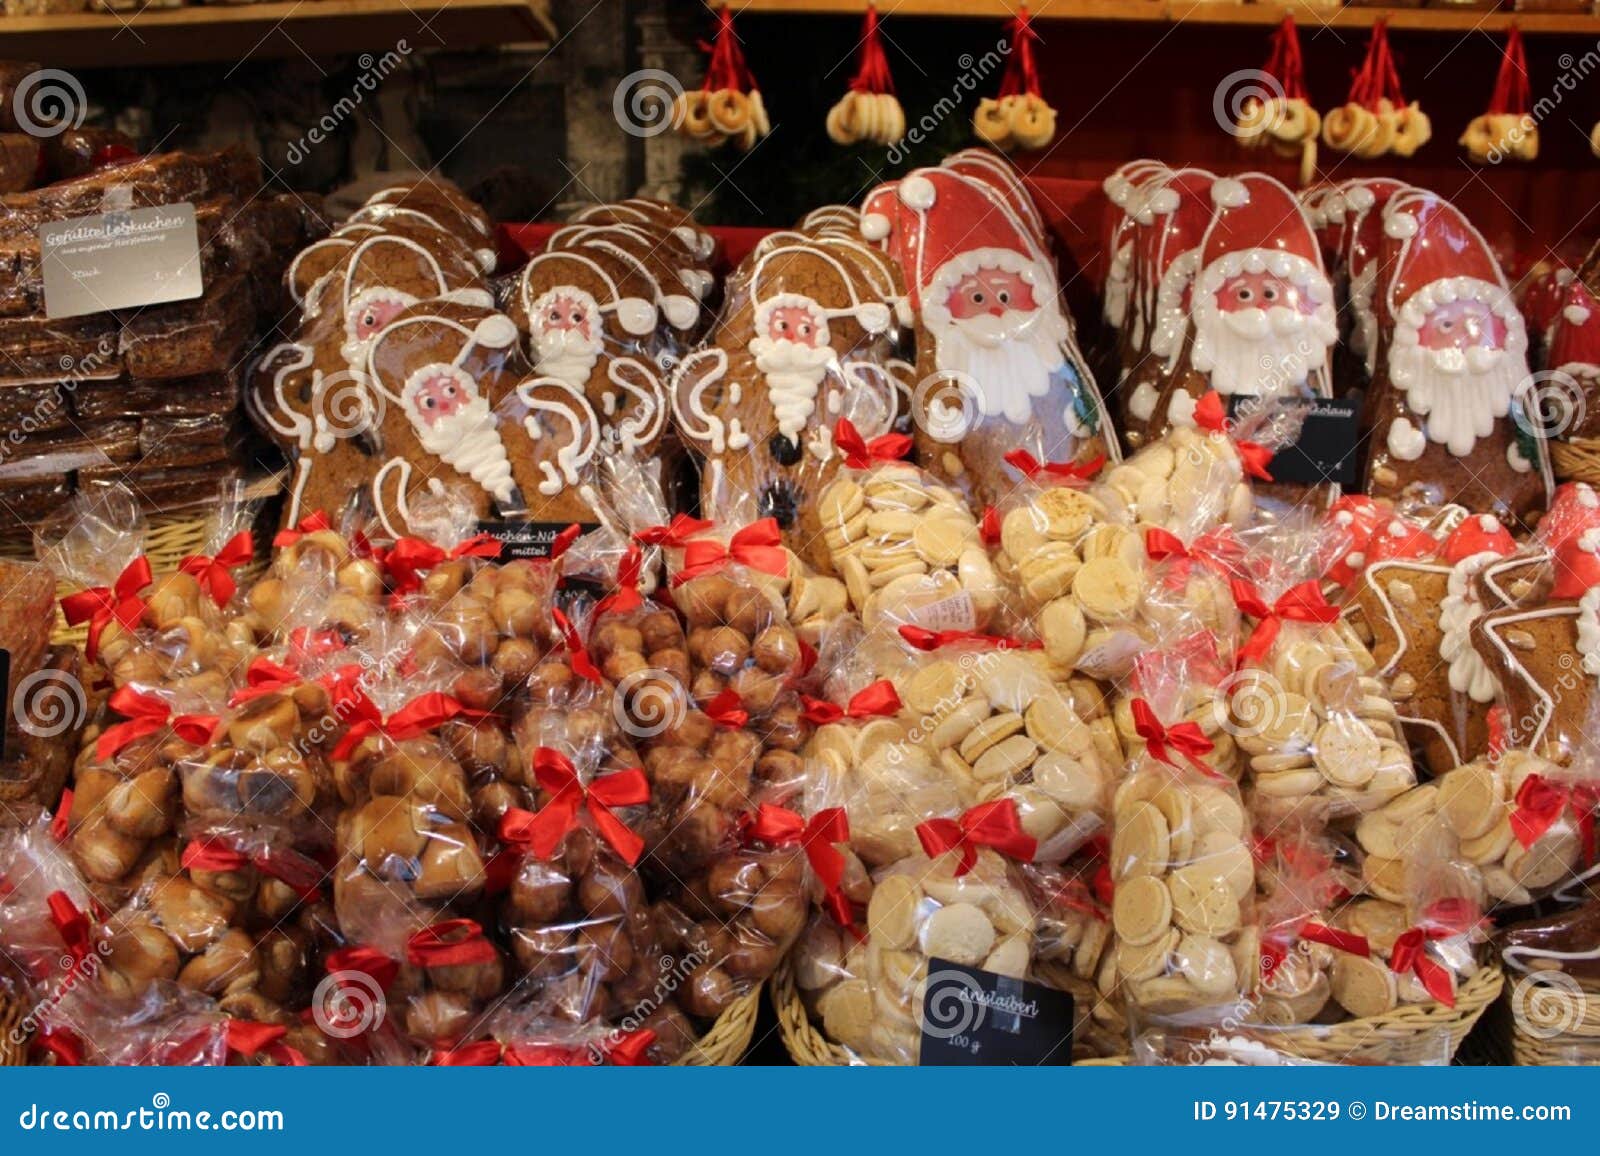 Traditional Gingerbread Cookies Stock Image - Image of europe, fantasy ...